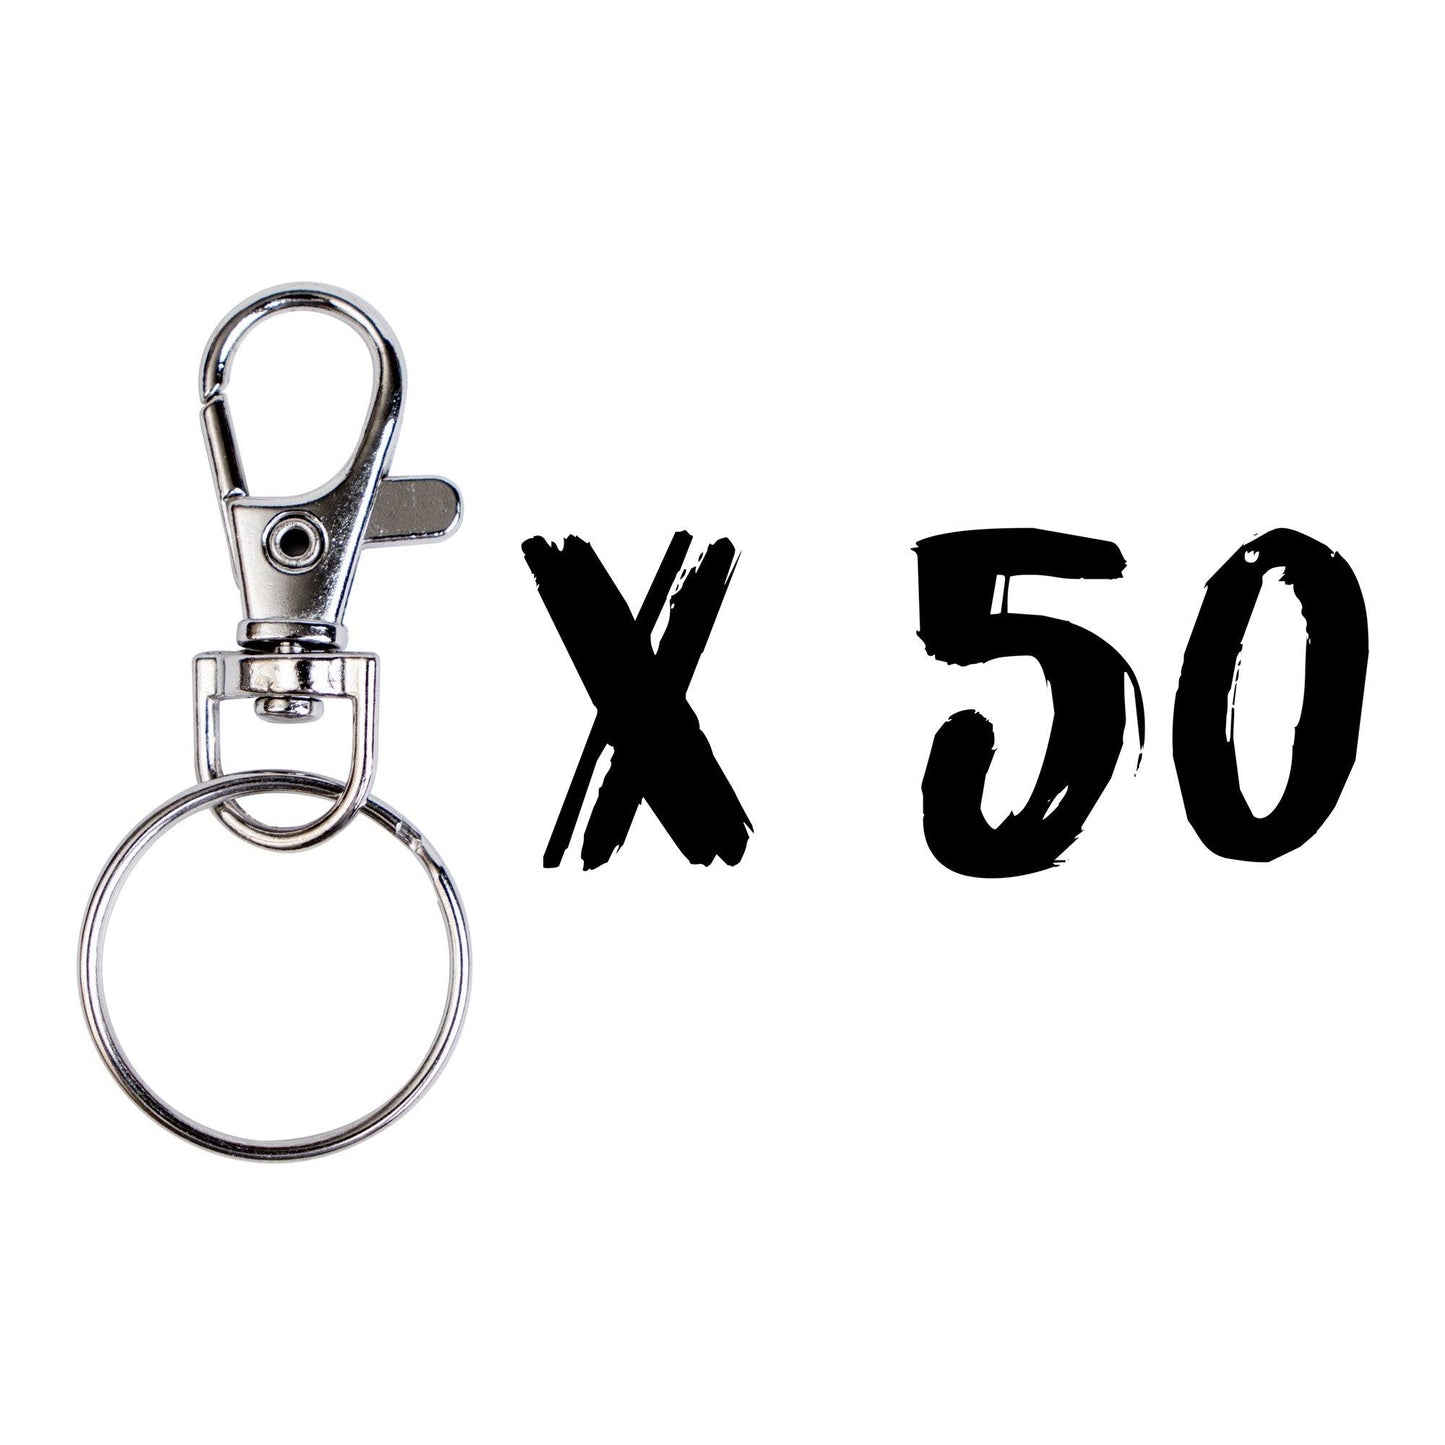 50ct - Assembled Keychain Rings with Lobster Clasp